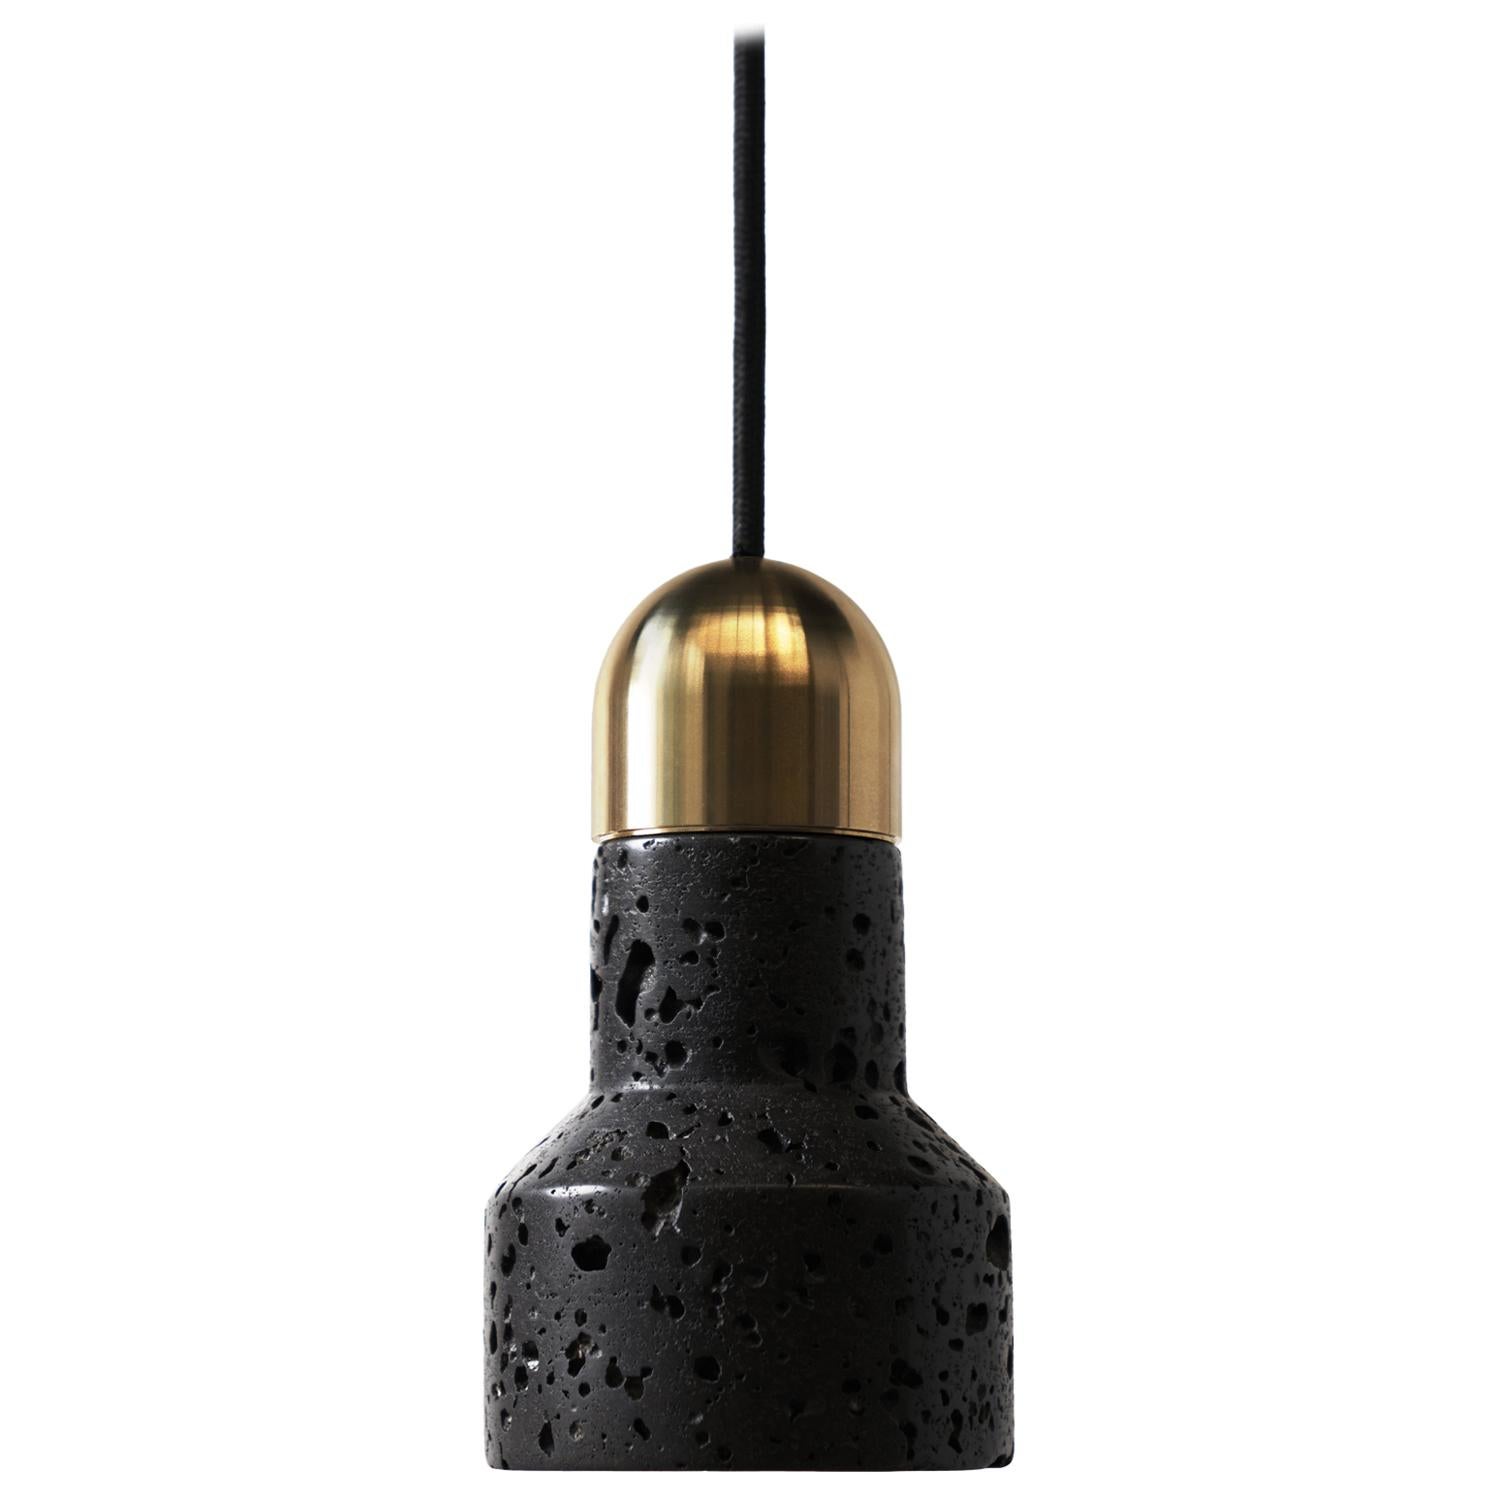 Lava Stone and Brass Pendant Light, “Qie, ” by Buzao